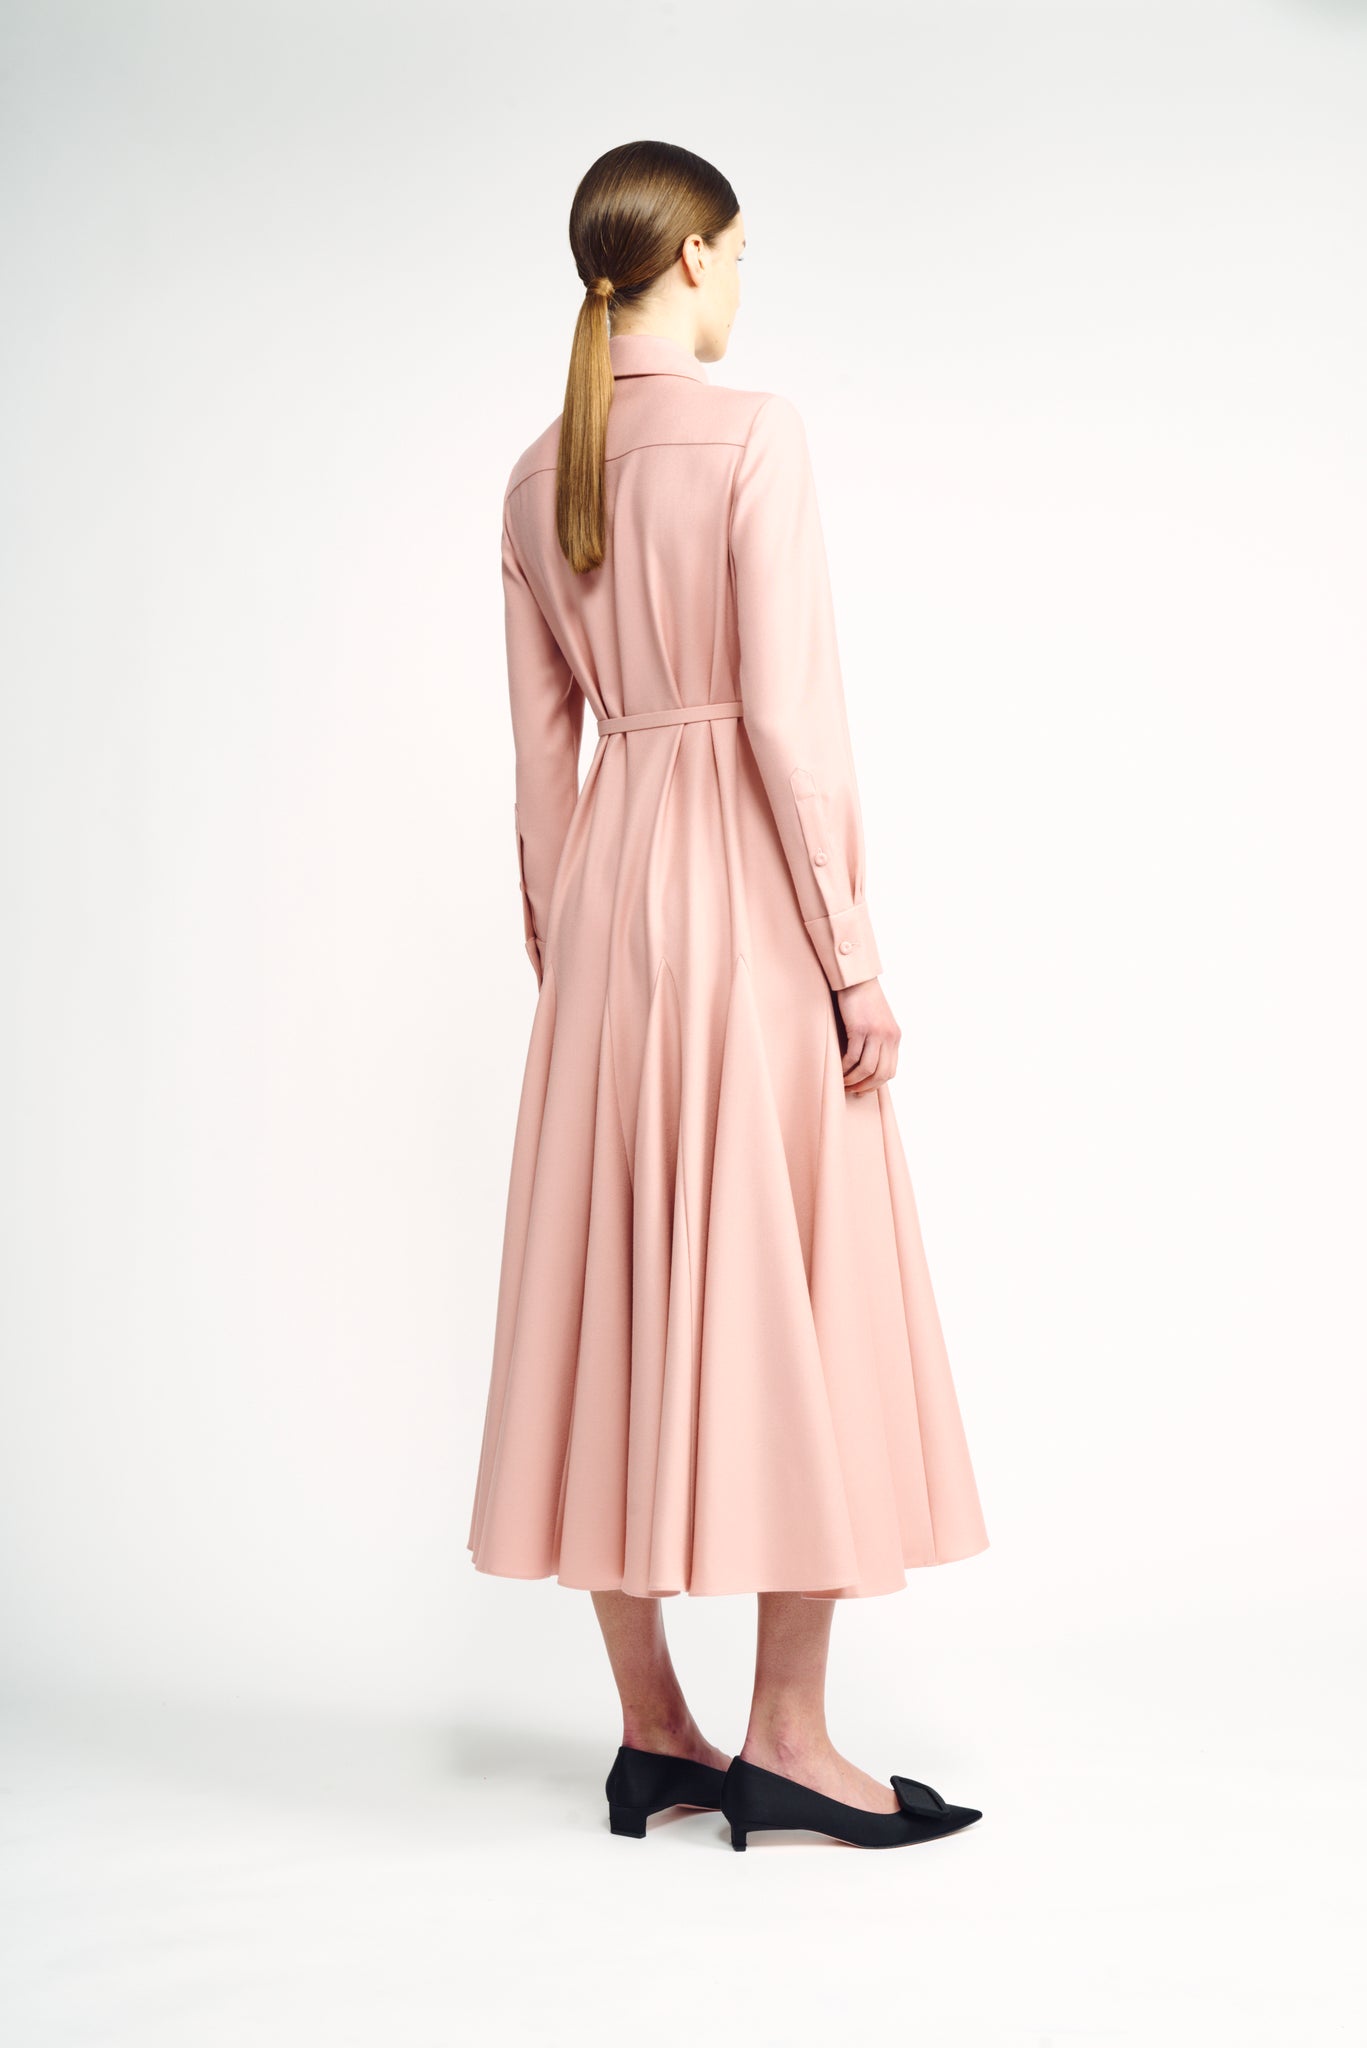 Marione Dress | Pink Long Sleeve Fit-and-Flare Short Dress | Emilia Wickstead